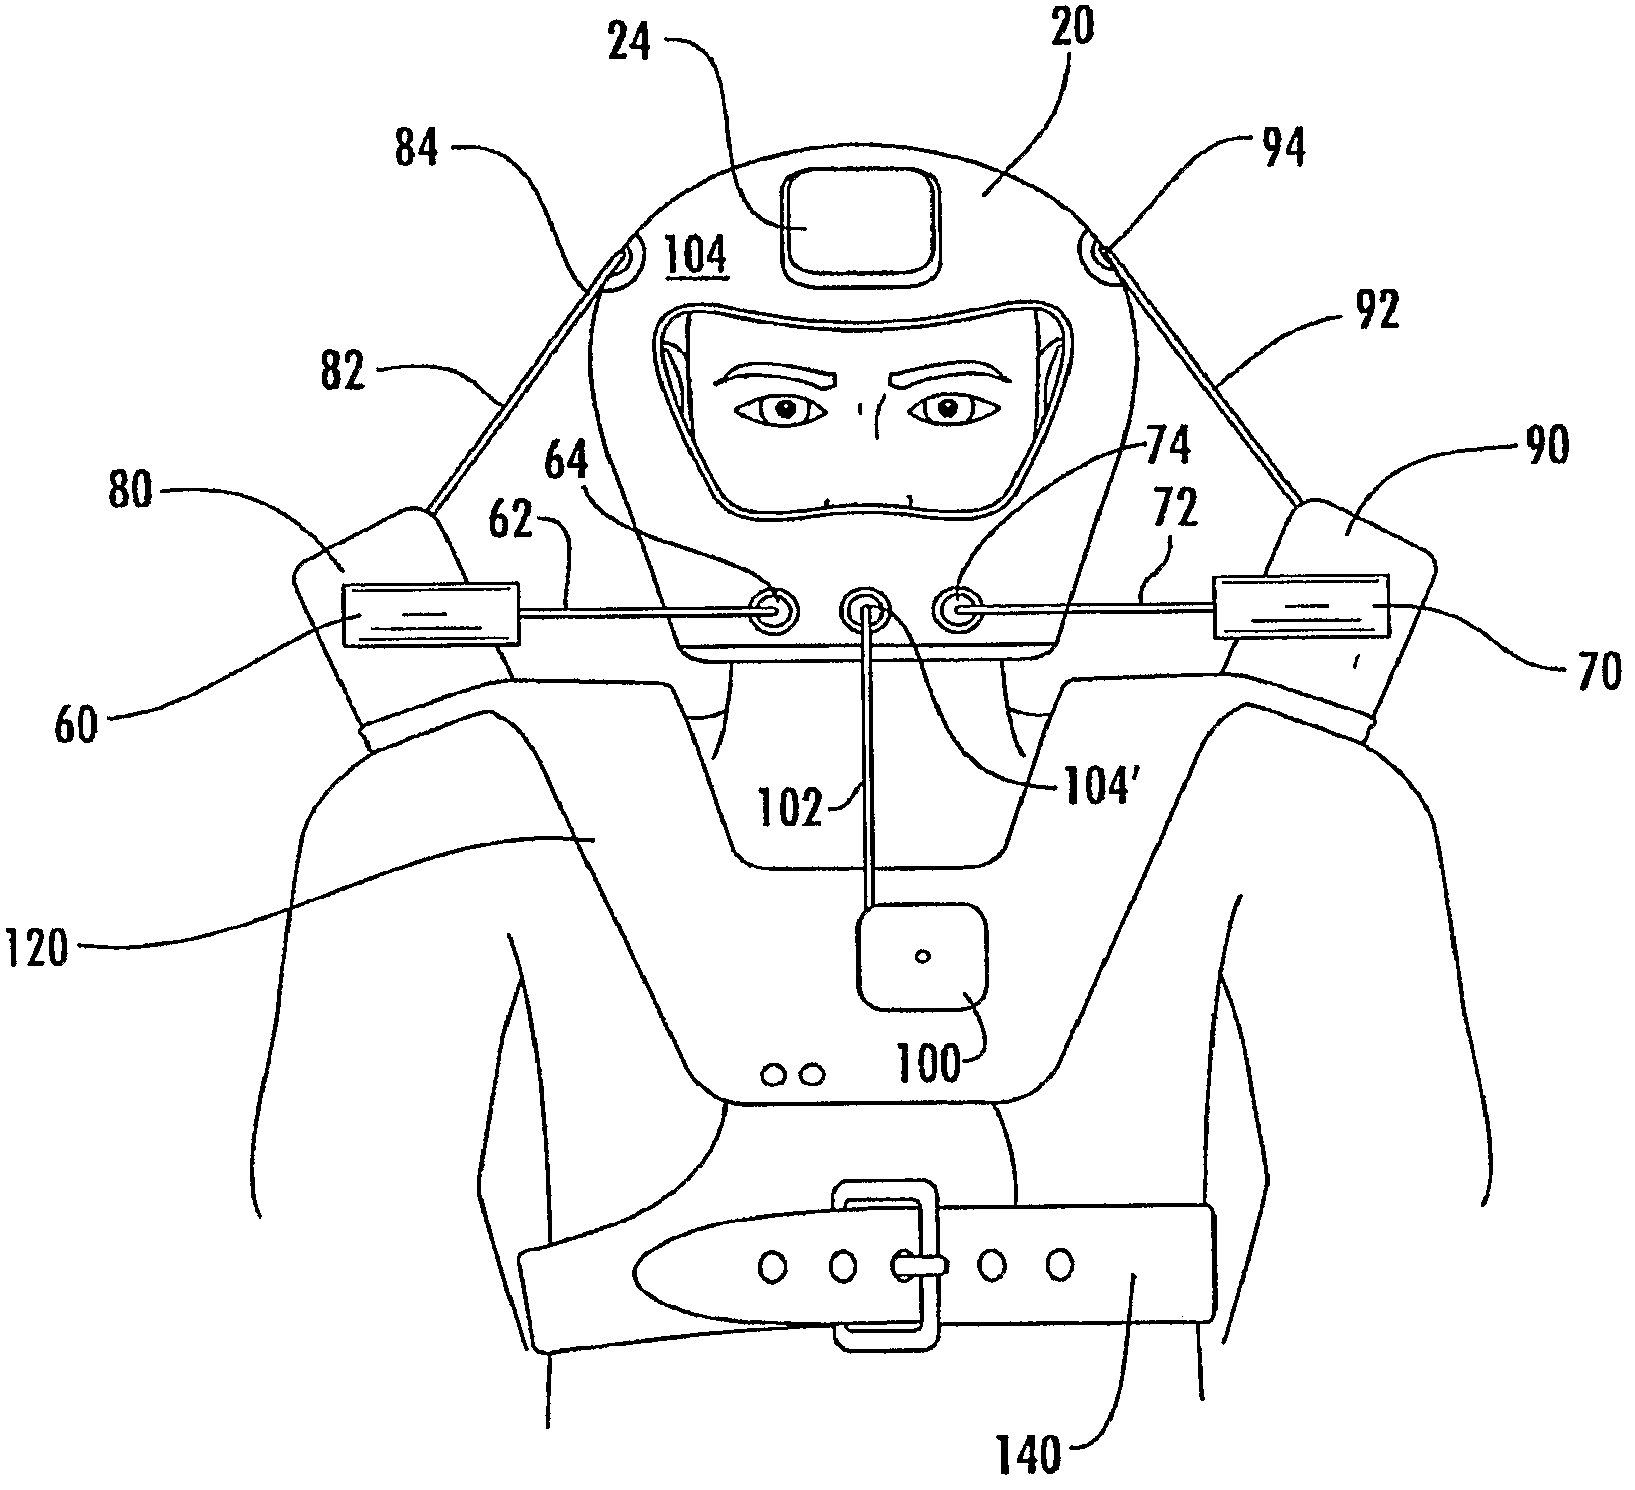 Apparatus for reducing brain and cervical spine injury due to rotational movement